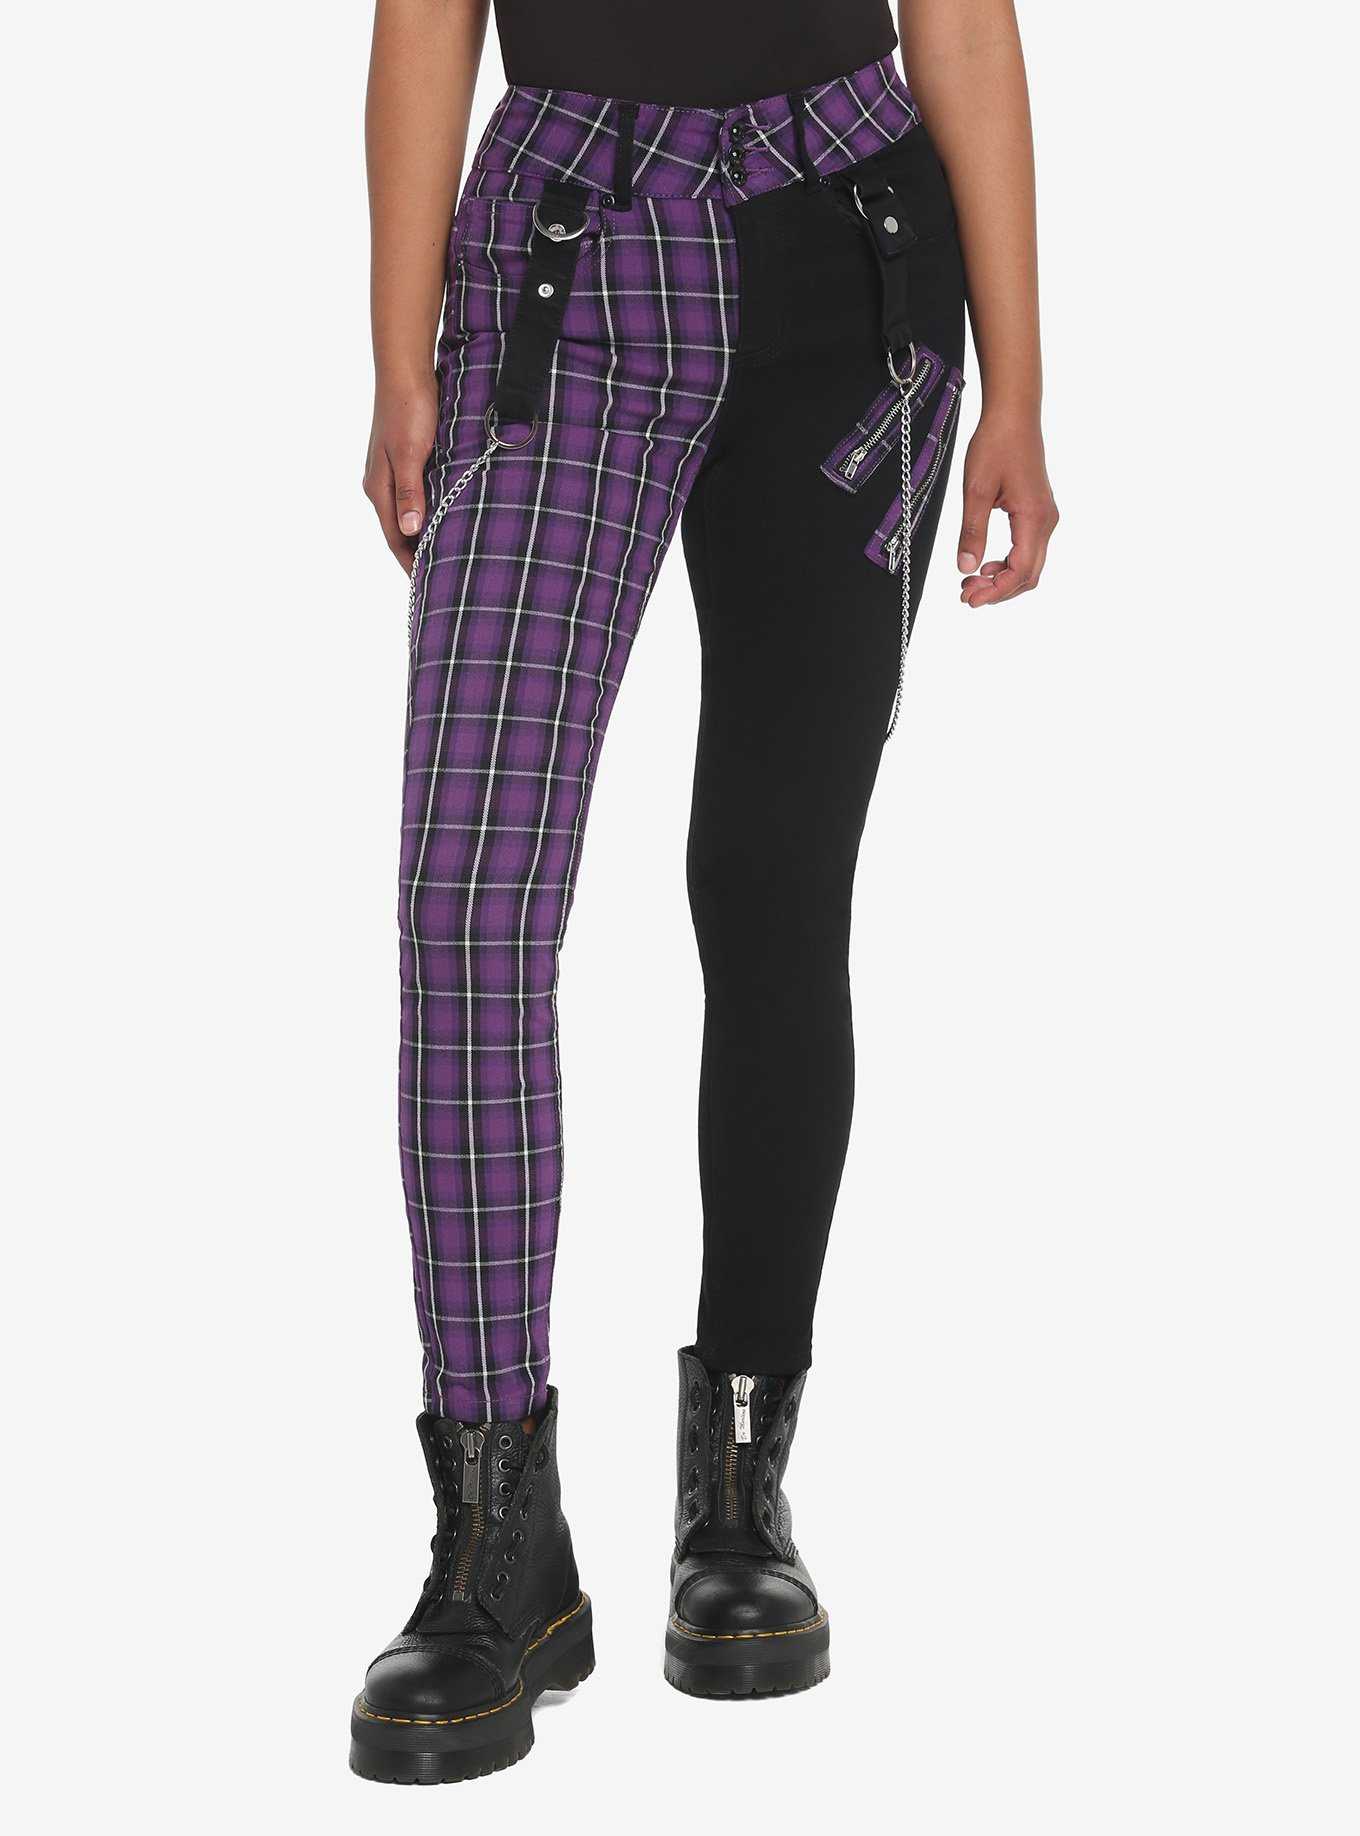 Hot Topic Pants Womens Small Red Black Plaid Mismatched